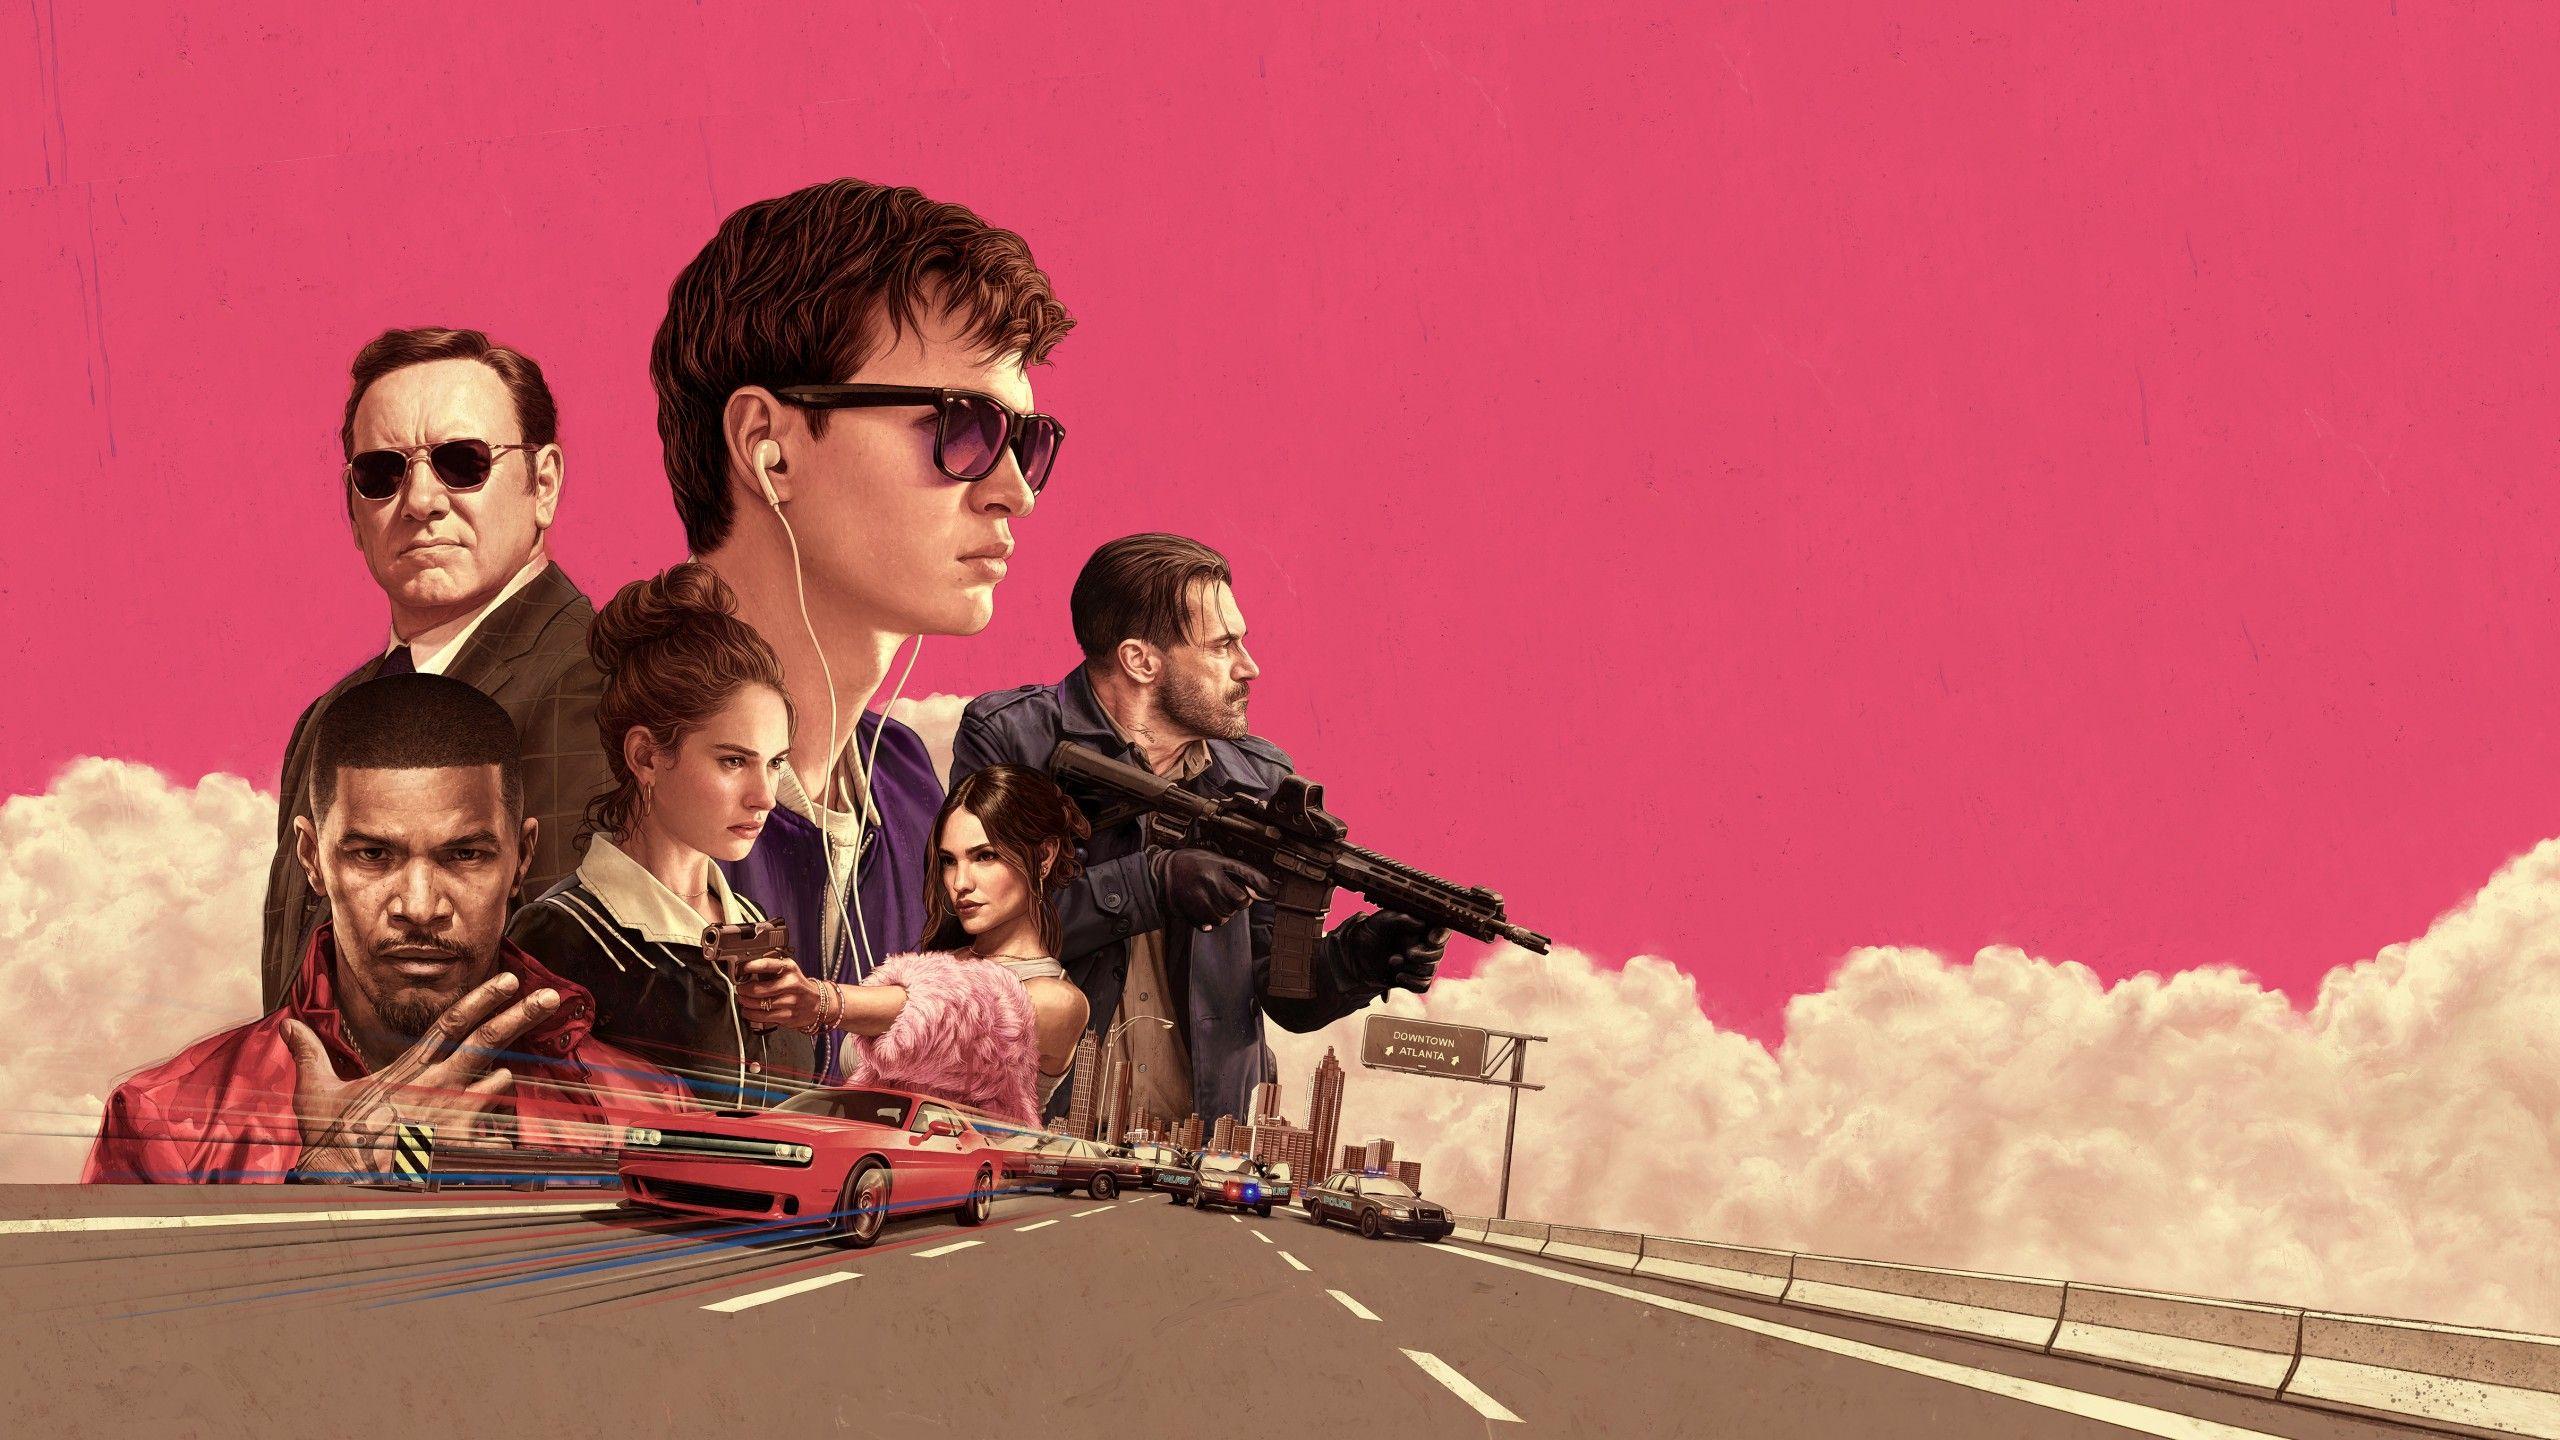 Wallpaper Baby Driver, Action, Crime, HD, 4K, Movies